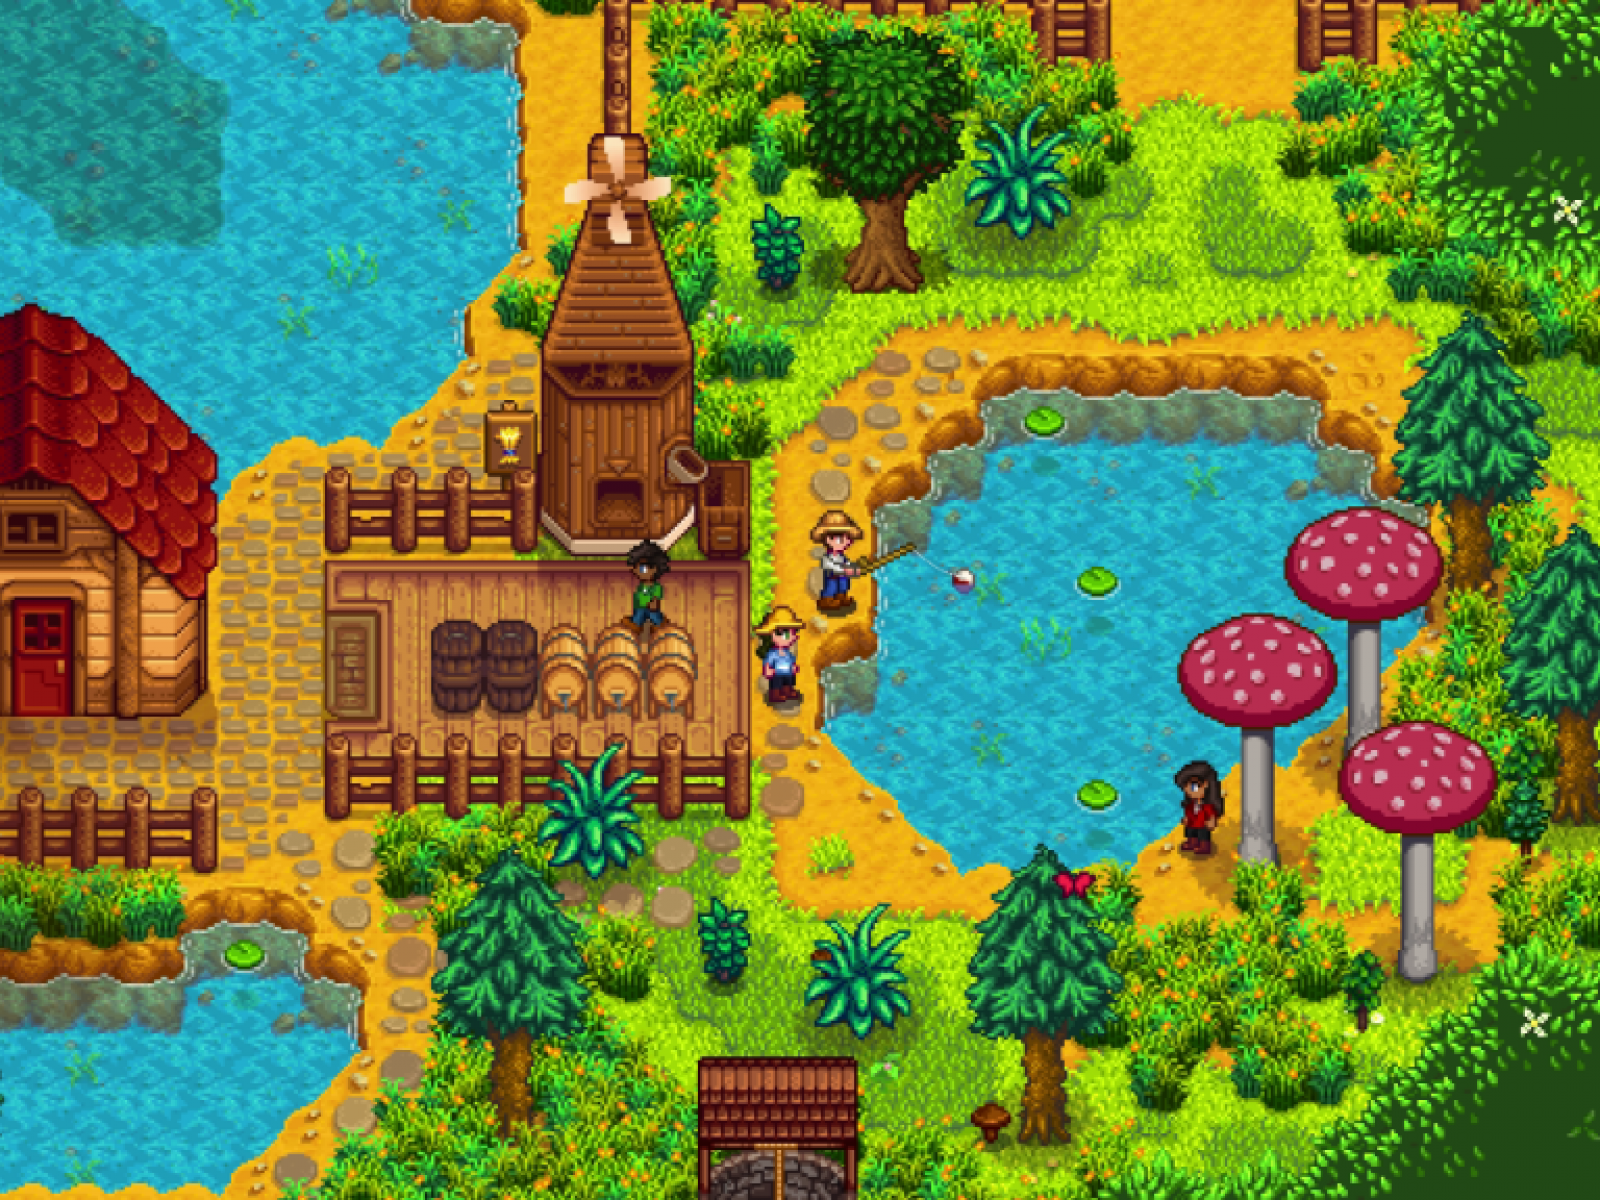 Stardew Valley Multiplayer Coming To Switch In A Few Days - Game Informer